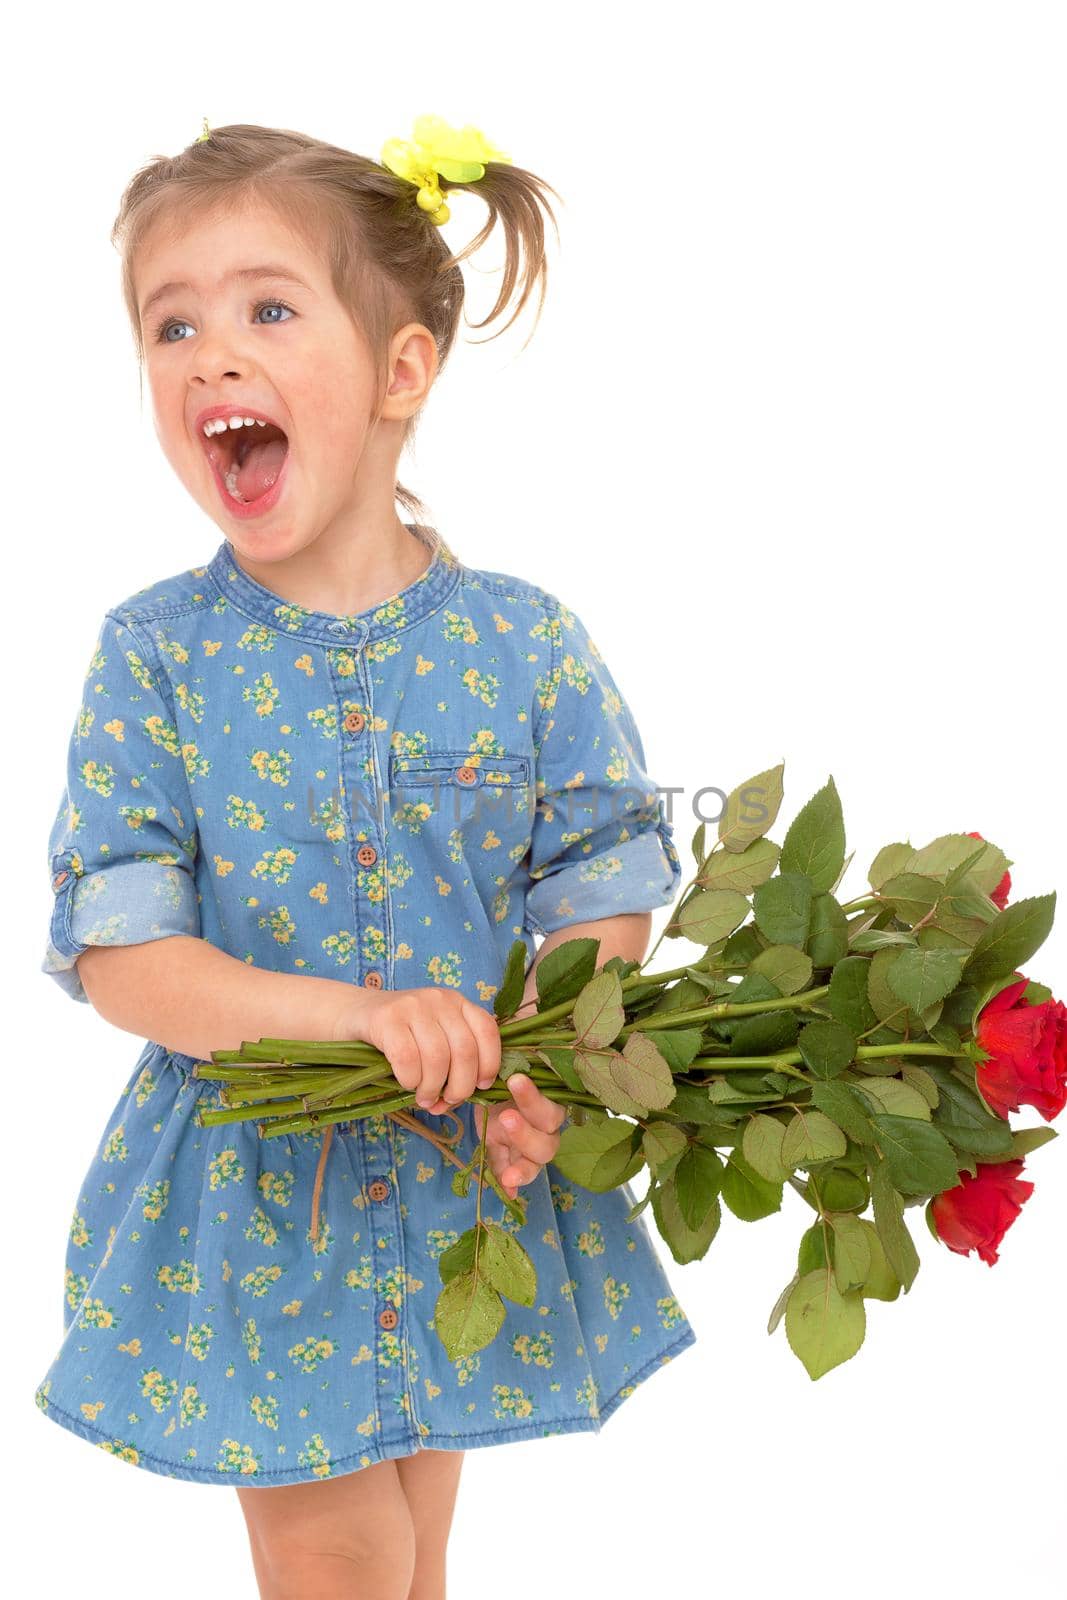 charming little girl holding a bouquet of red roses. by kolesnikov_studio